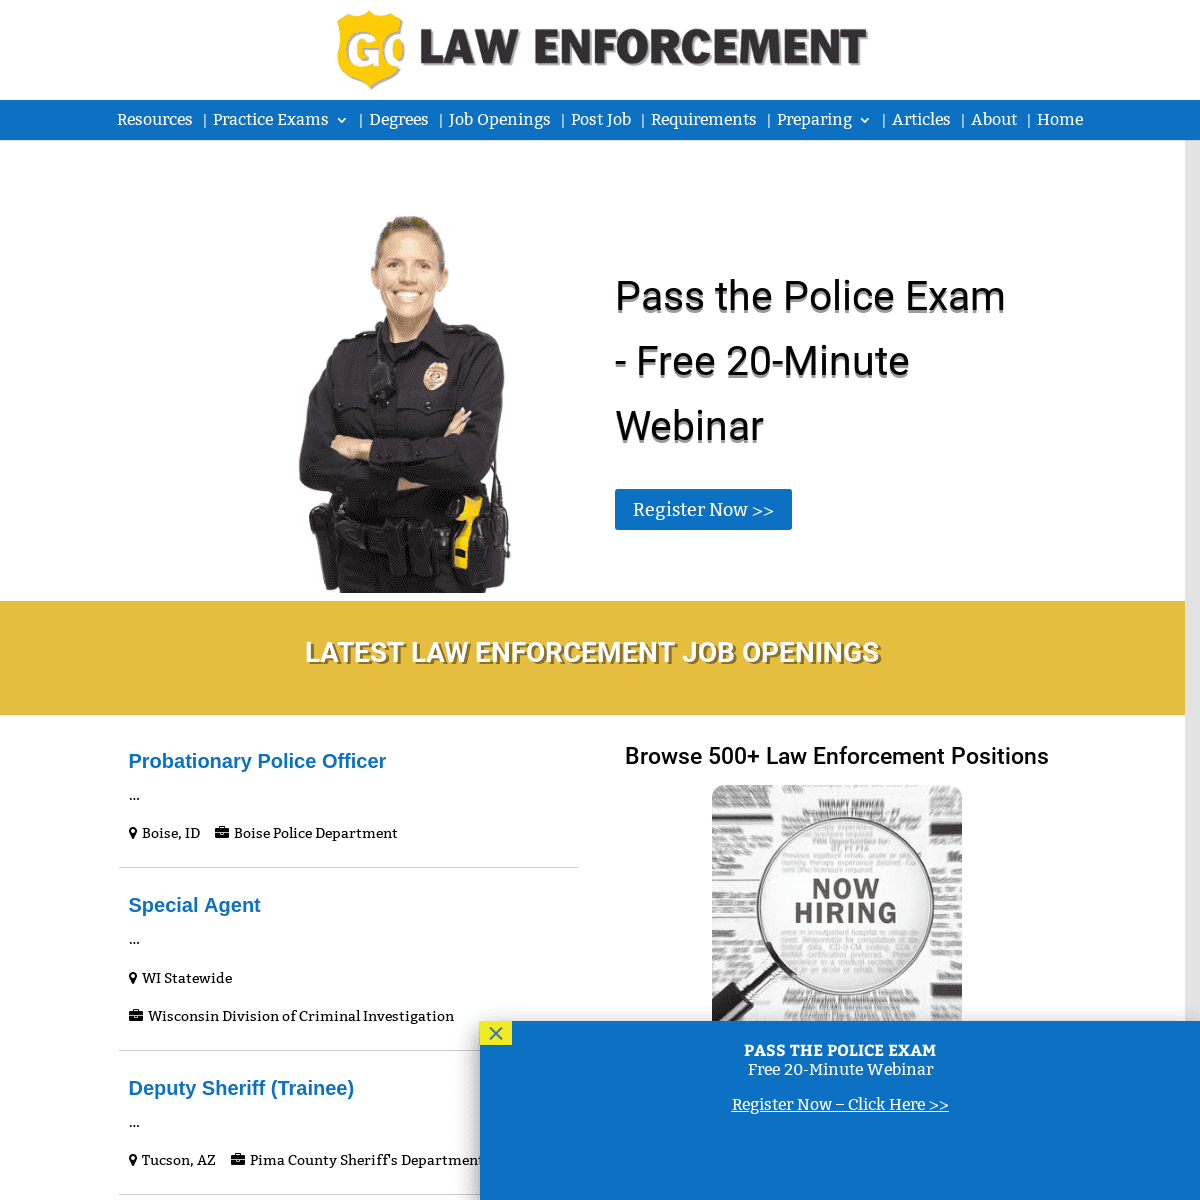 Go Law Enforcement - The largest listings of Current Job Openings